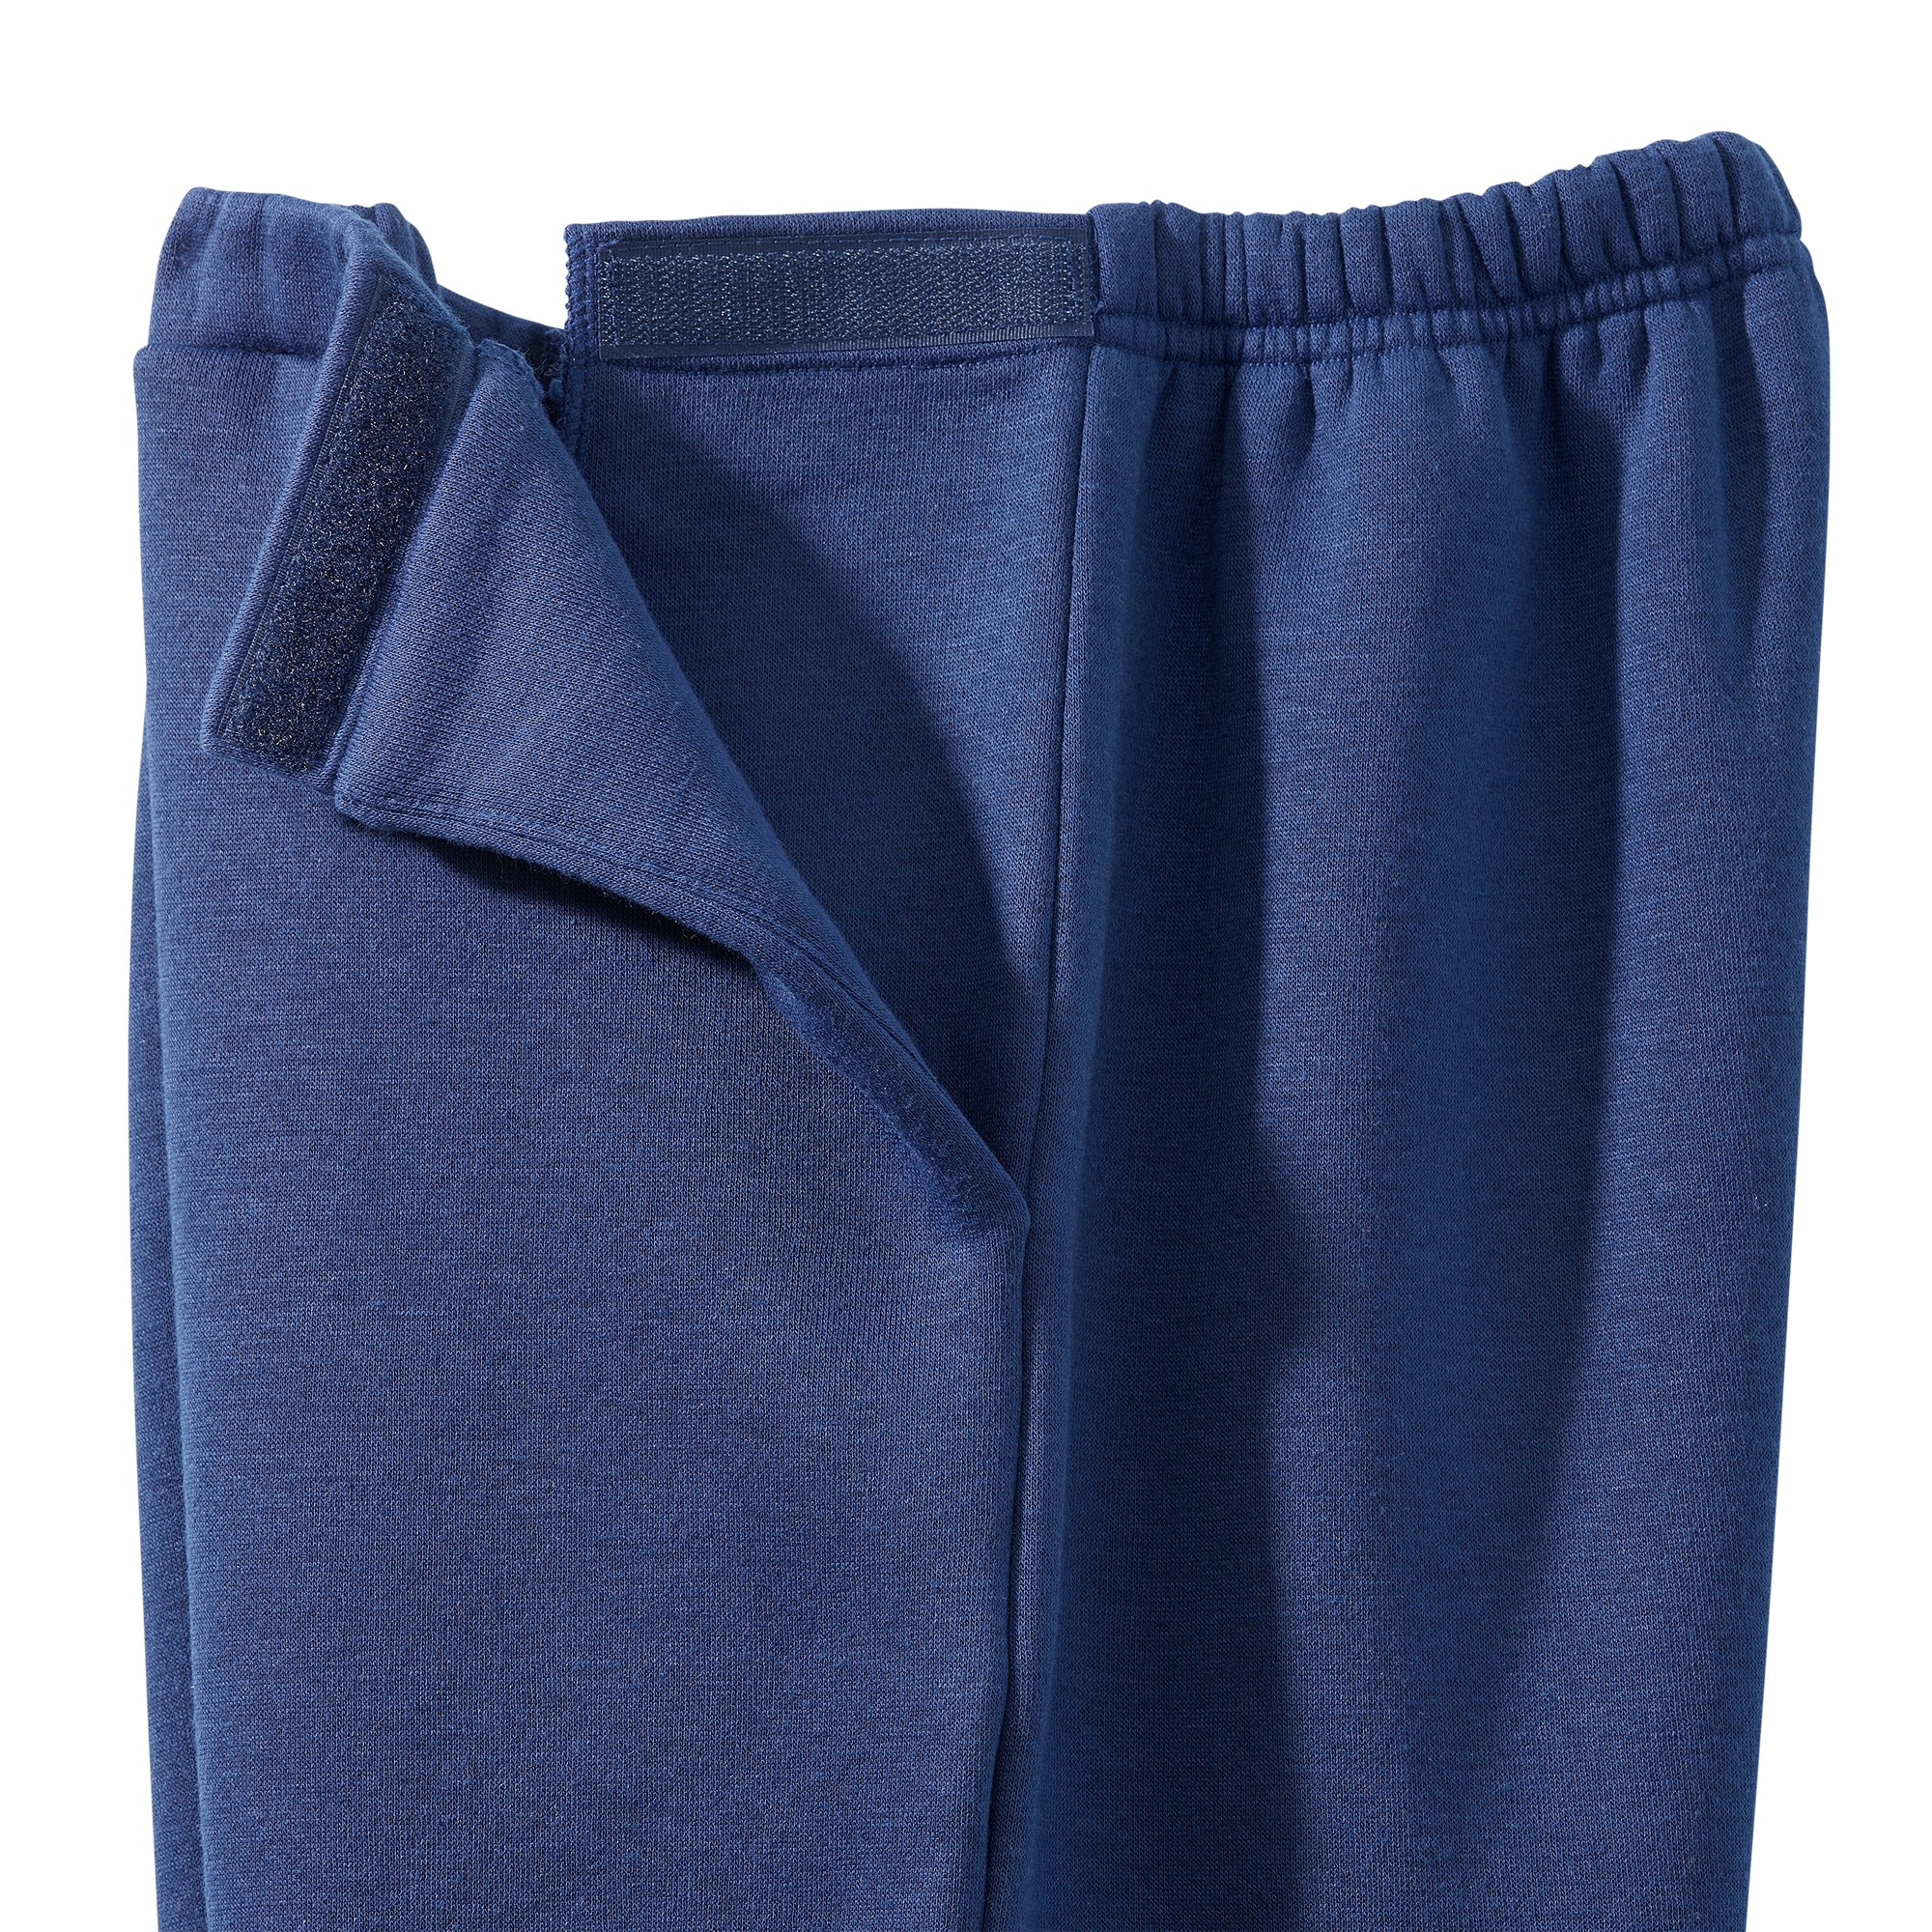 PANTS, TRACK WMNS OPEN SIDE NAVY LG